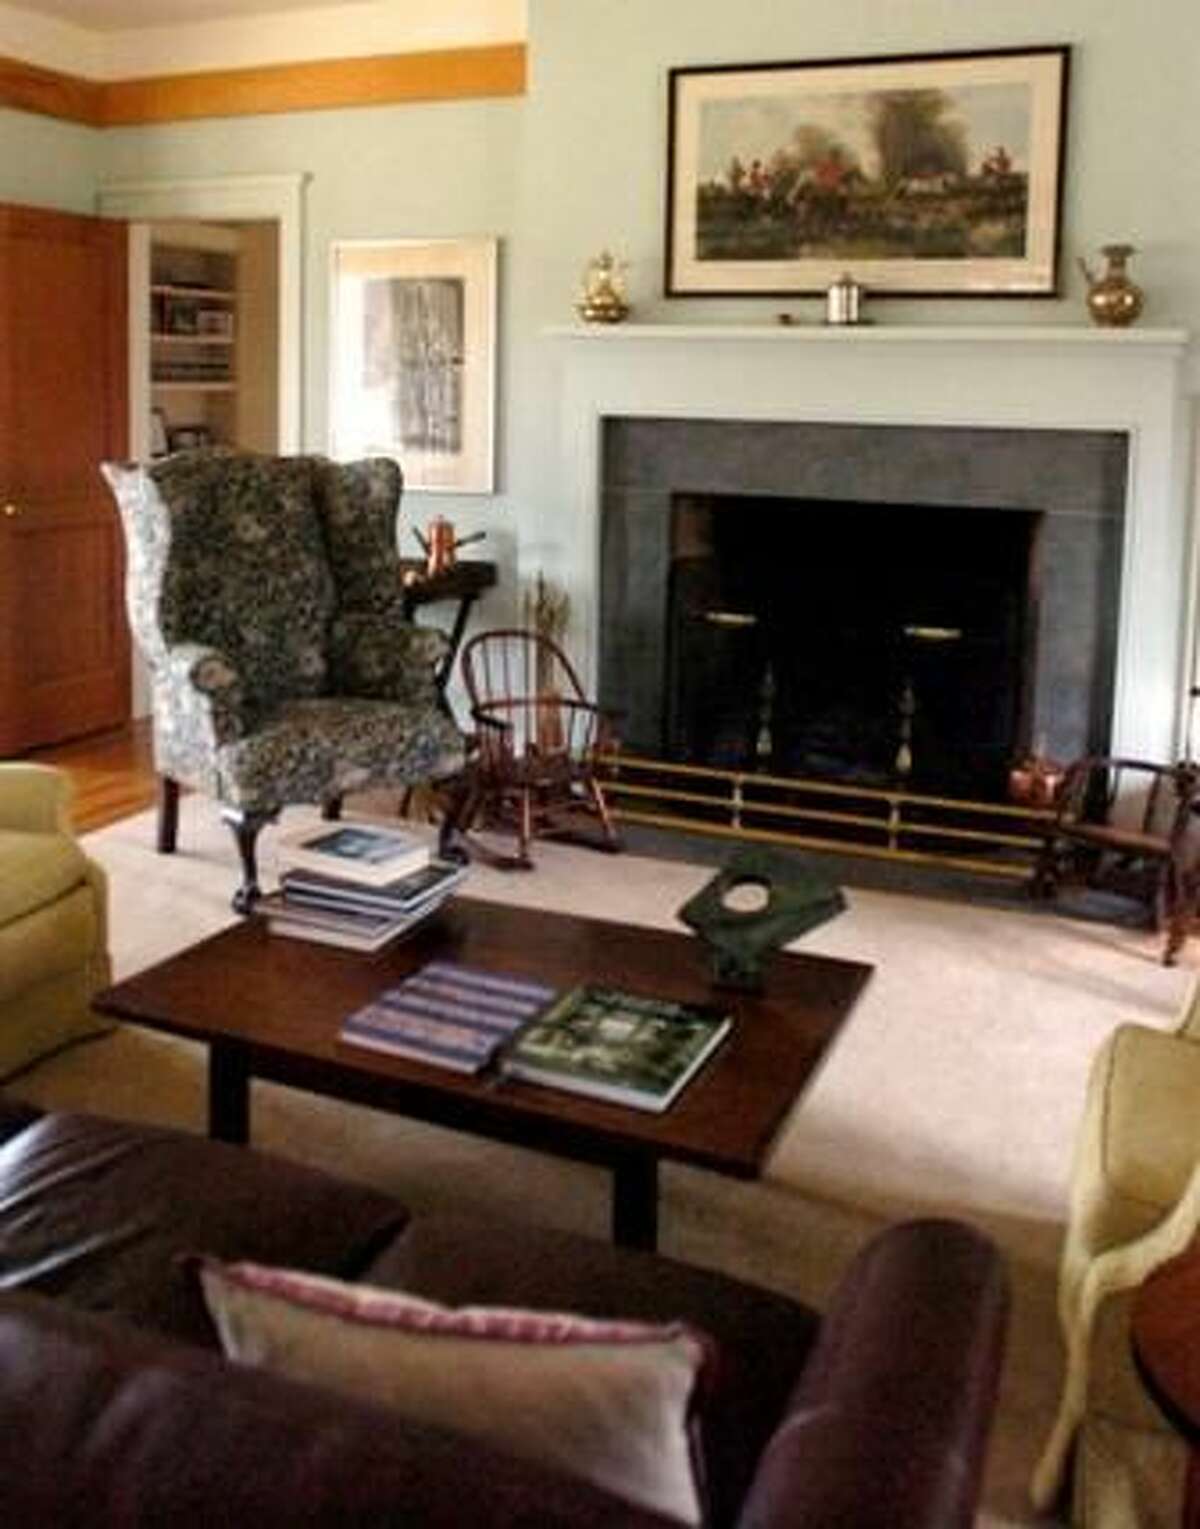 A sitting room with fireplace. Photo by Laurie Gaboardi.